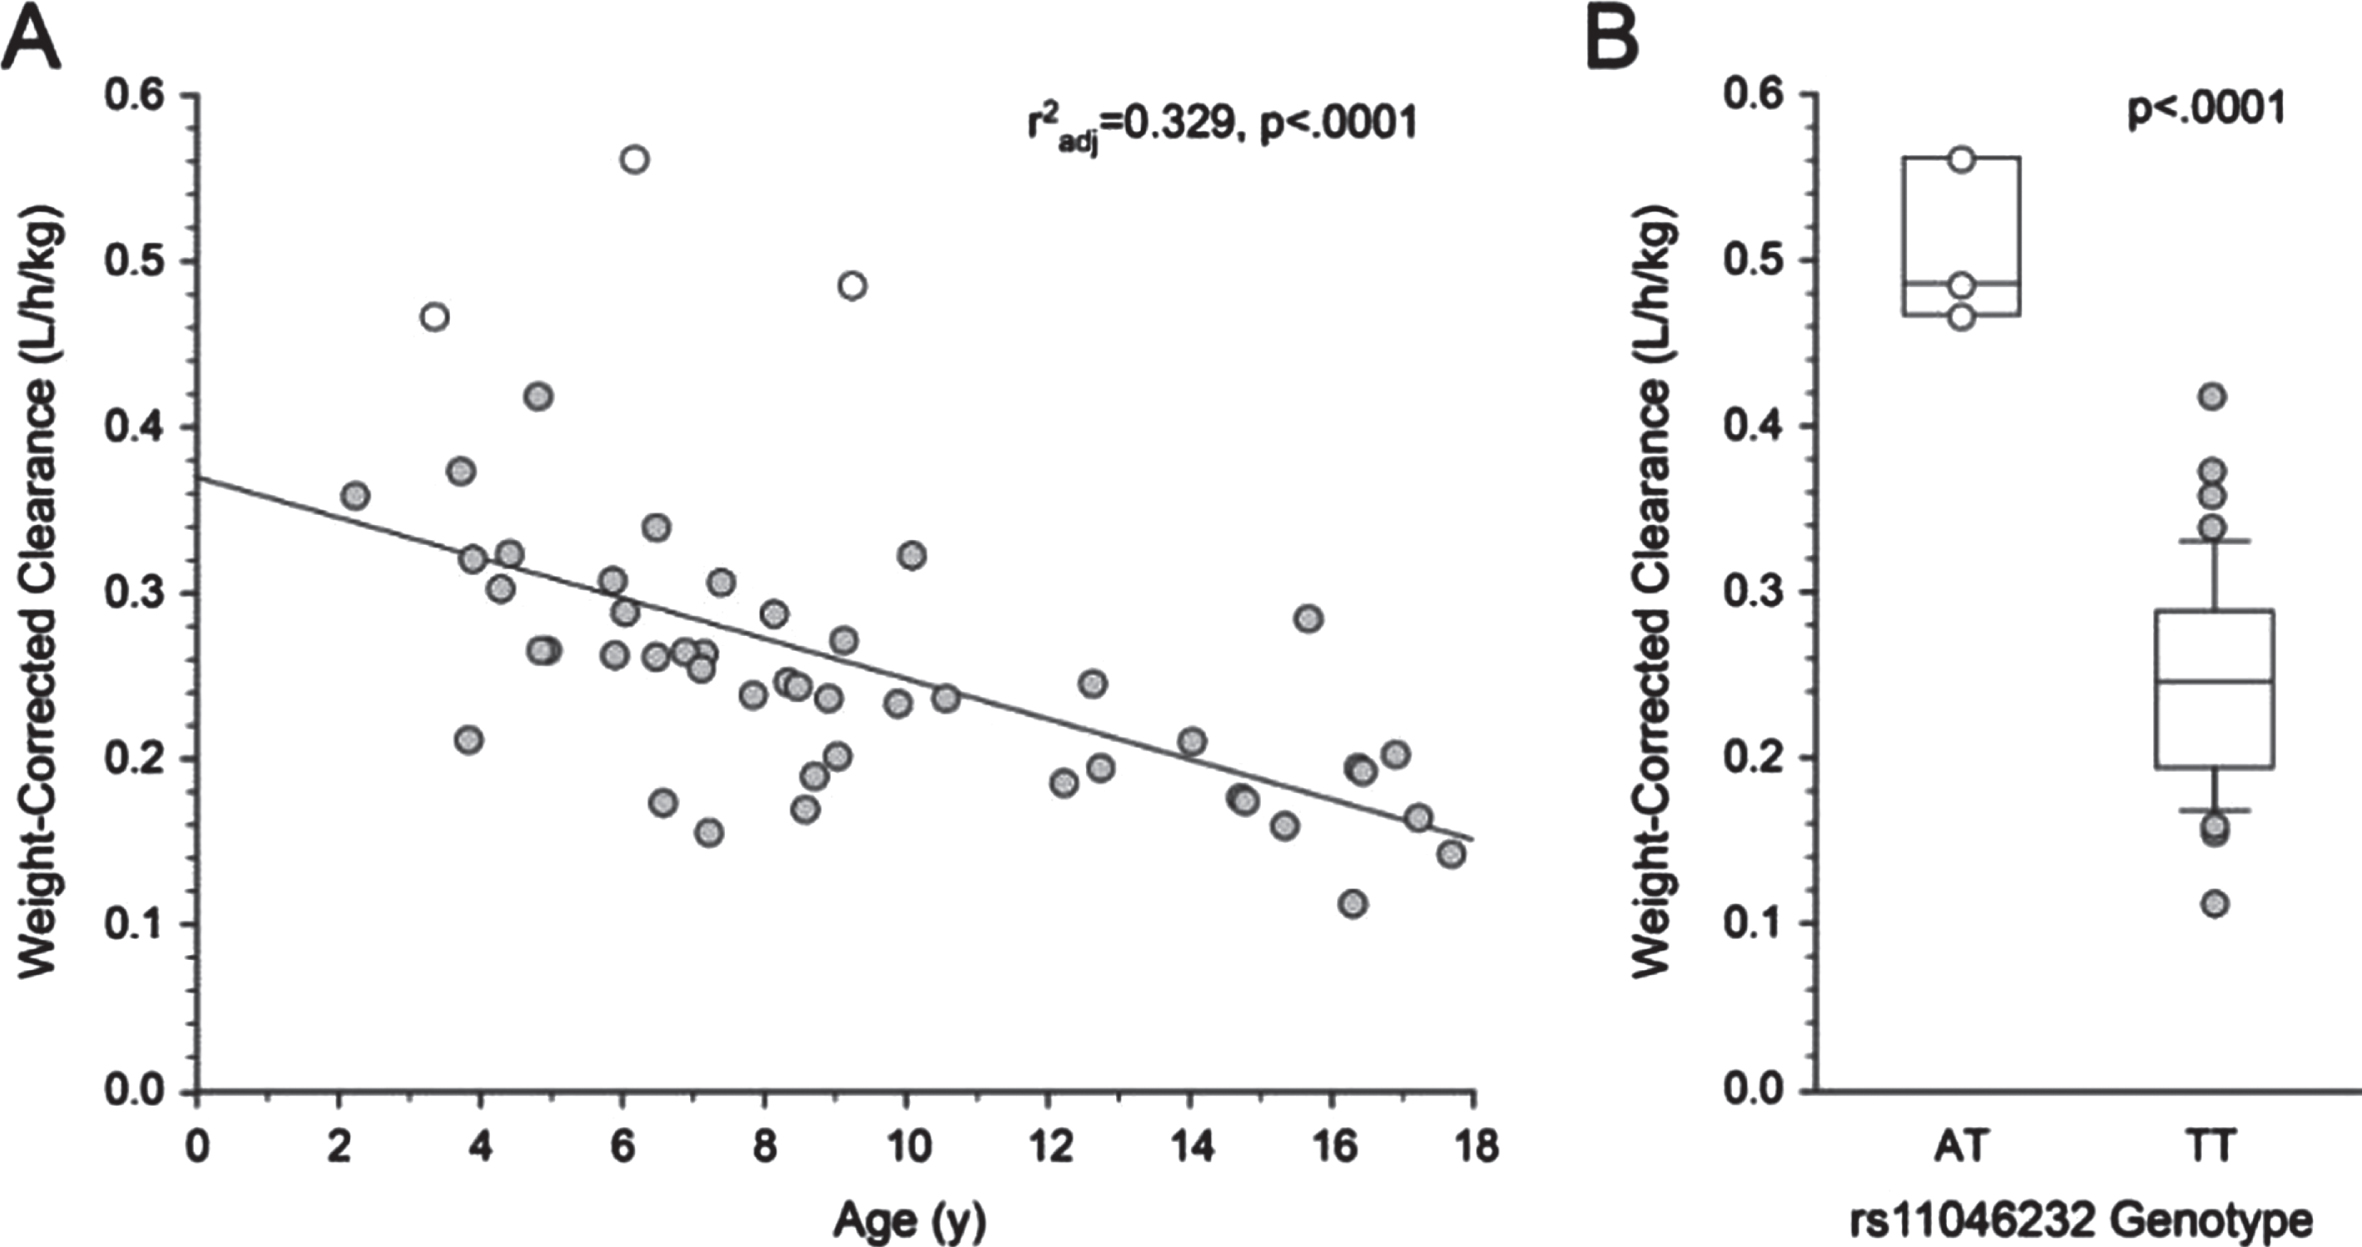 Oral baclofen weight-corrected clearance differences between wild-type (grey dots) and heterogenous (white dots) children with cerebral palsy. This figure is reproduced with permission from the author per Elsevier’s retained author rights [17].